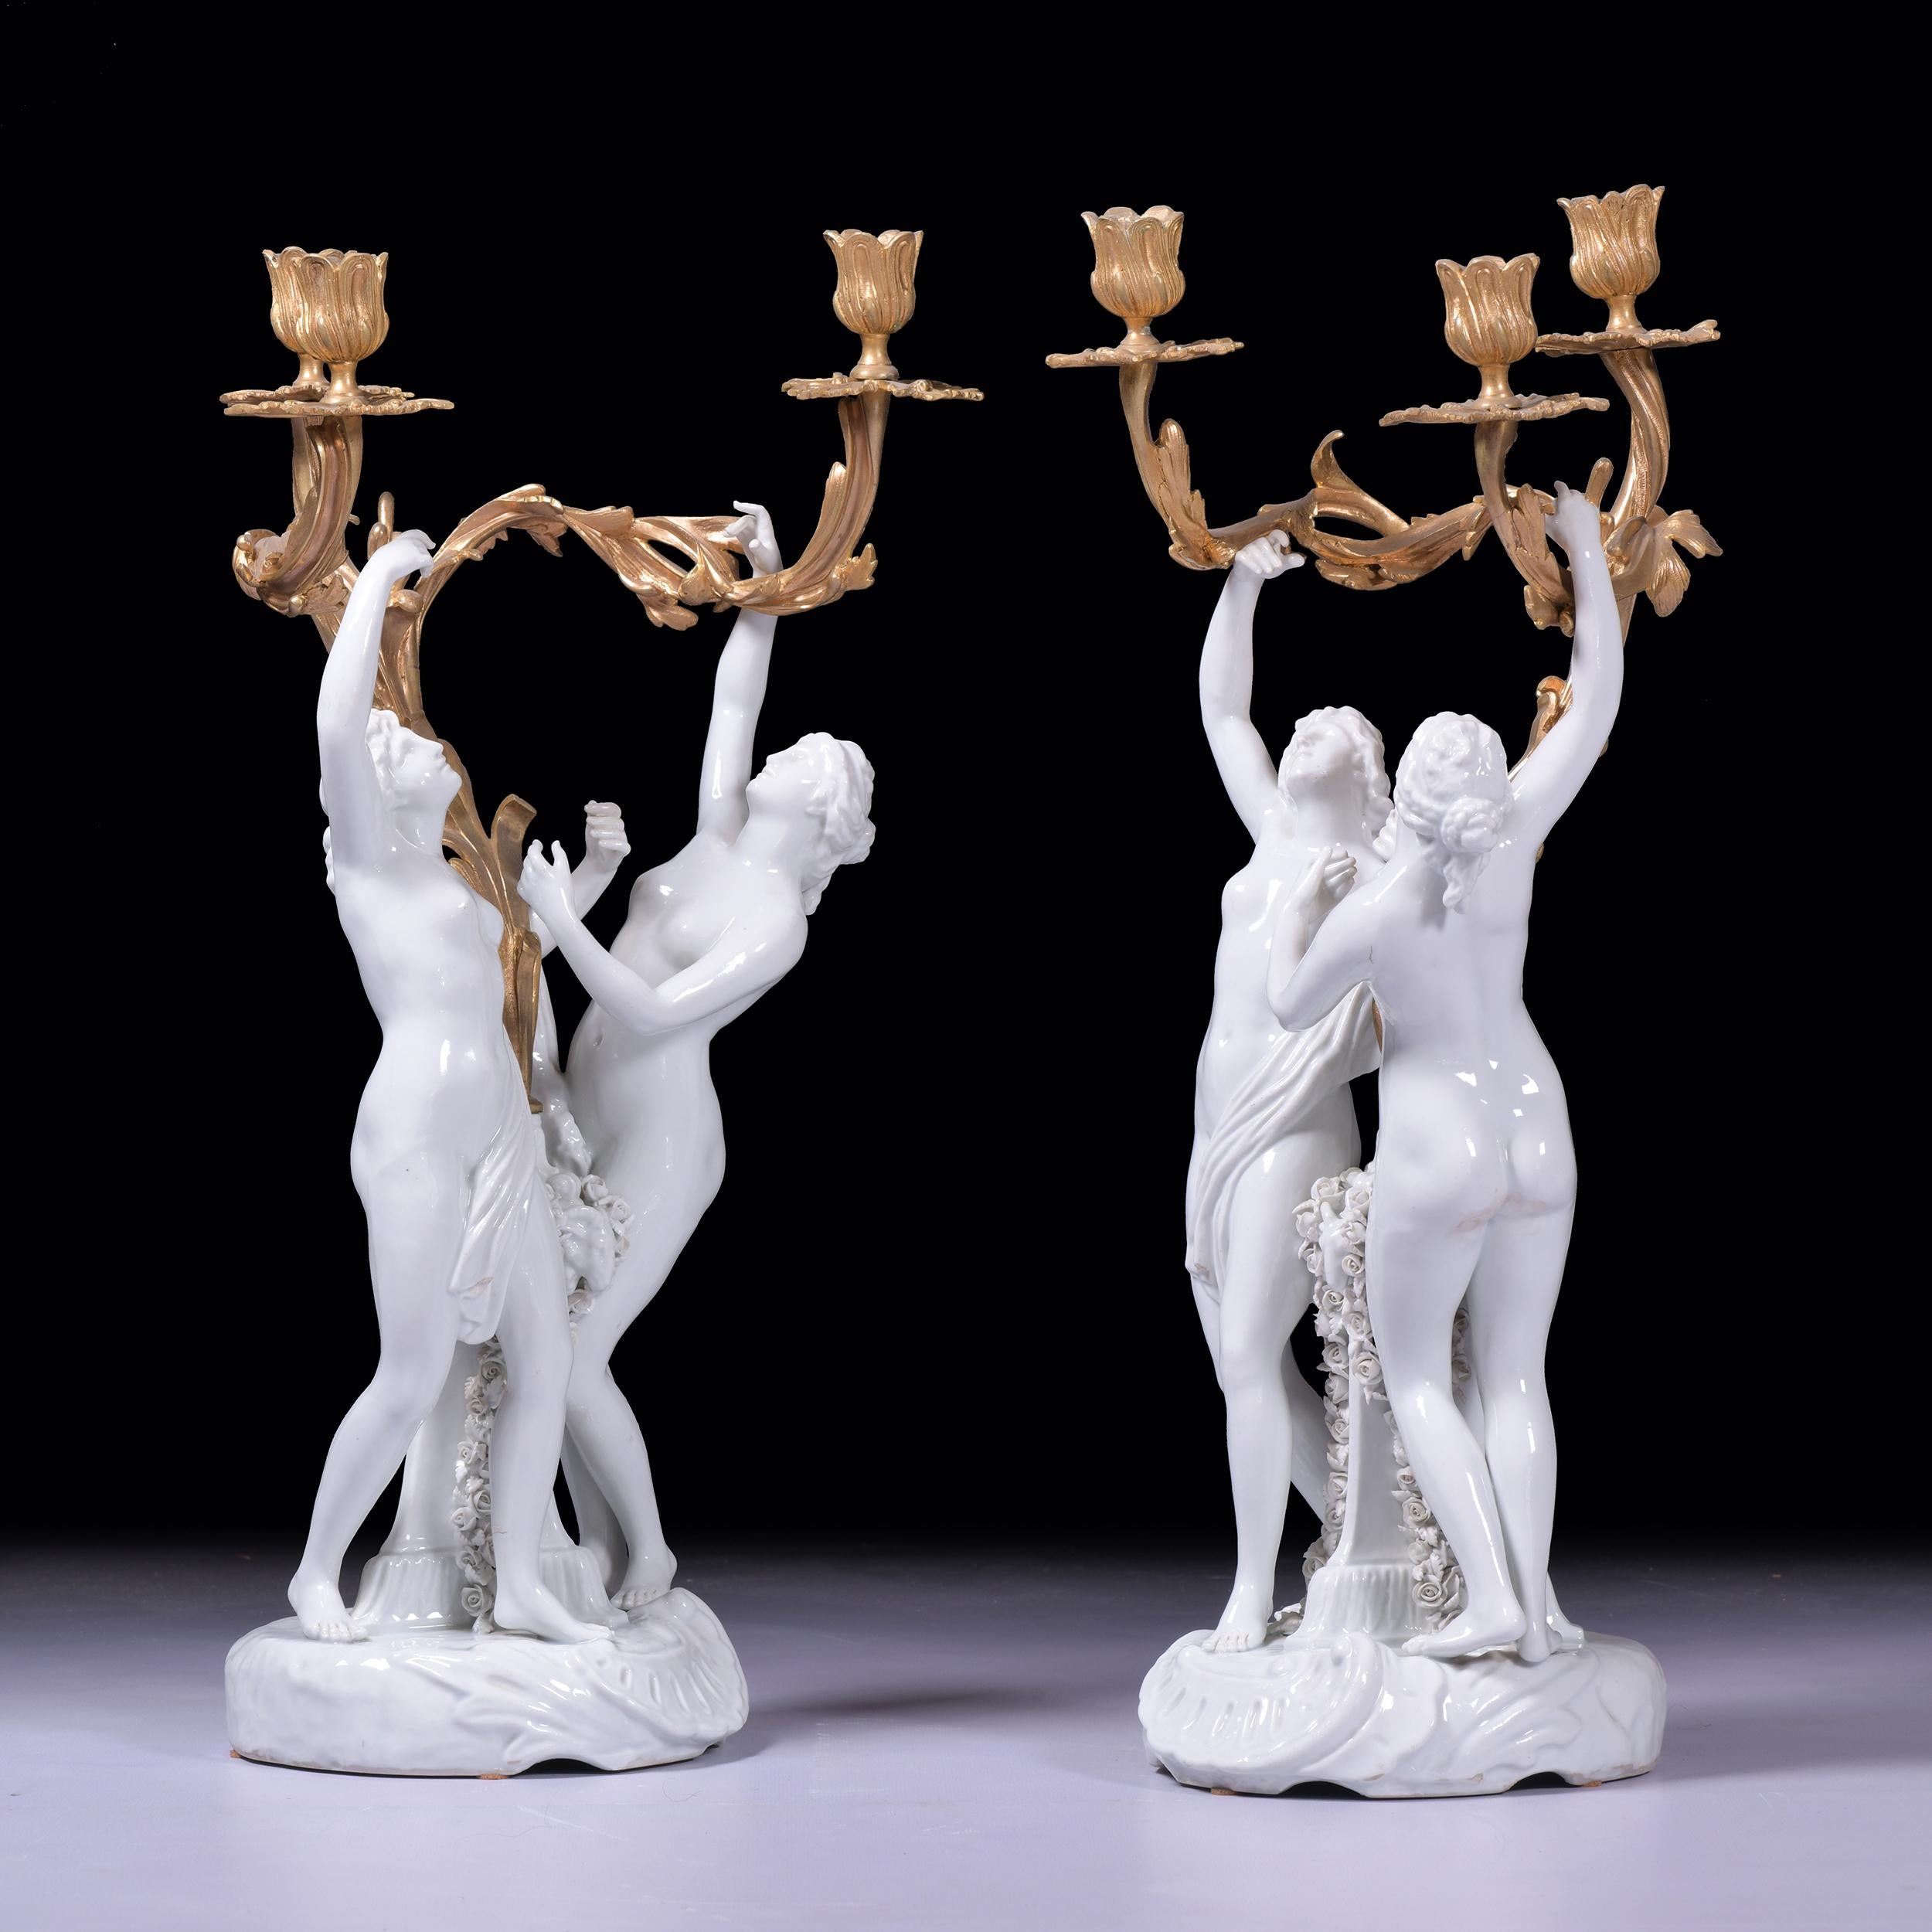 A fine pair of 19th century Neo-classical Style porcelain and ormolu candelabra by Capodimonte.

Circa 1860

Origin: Italy

Capodimonte porcelain is porcelain created by the Capodimonte porcelain manufactory, which was established in Naples, Italy,